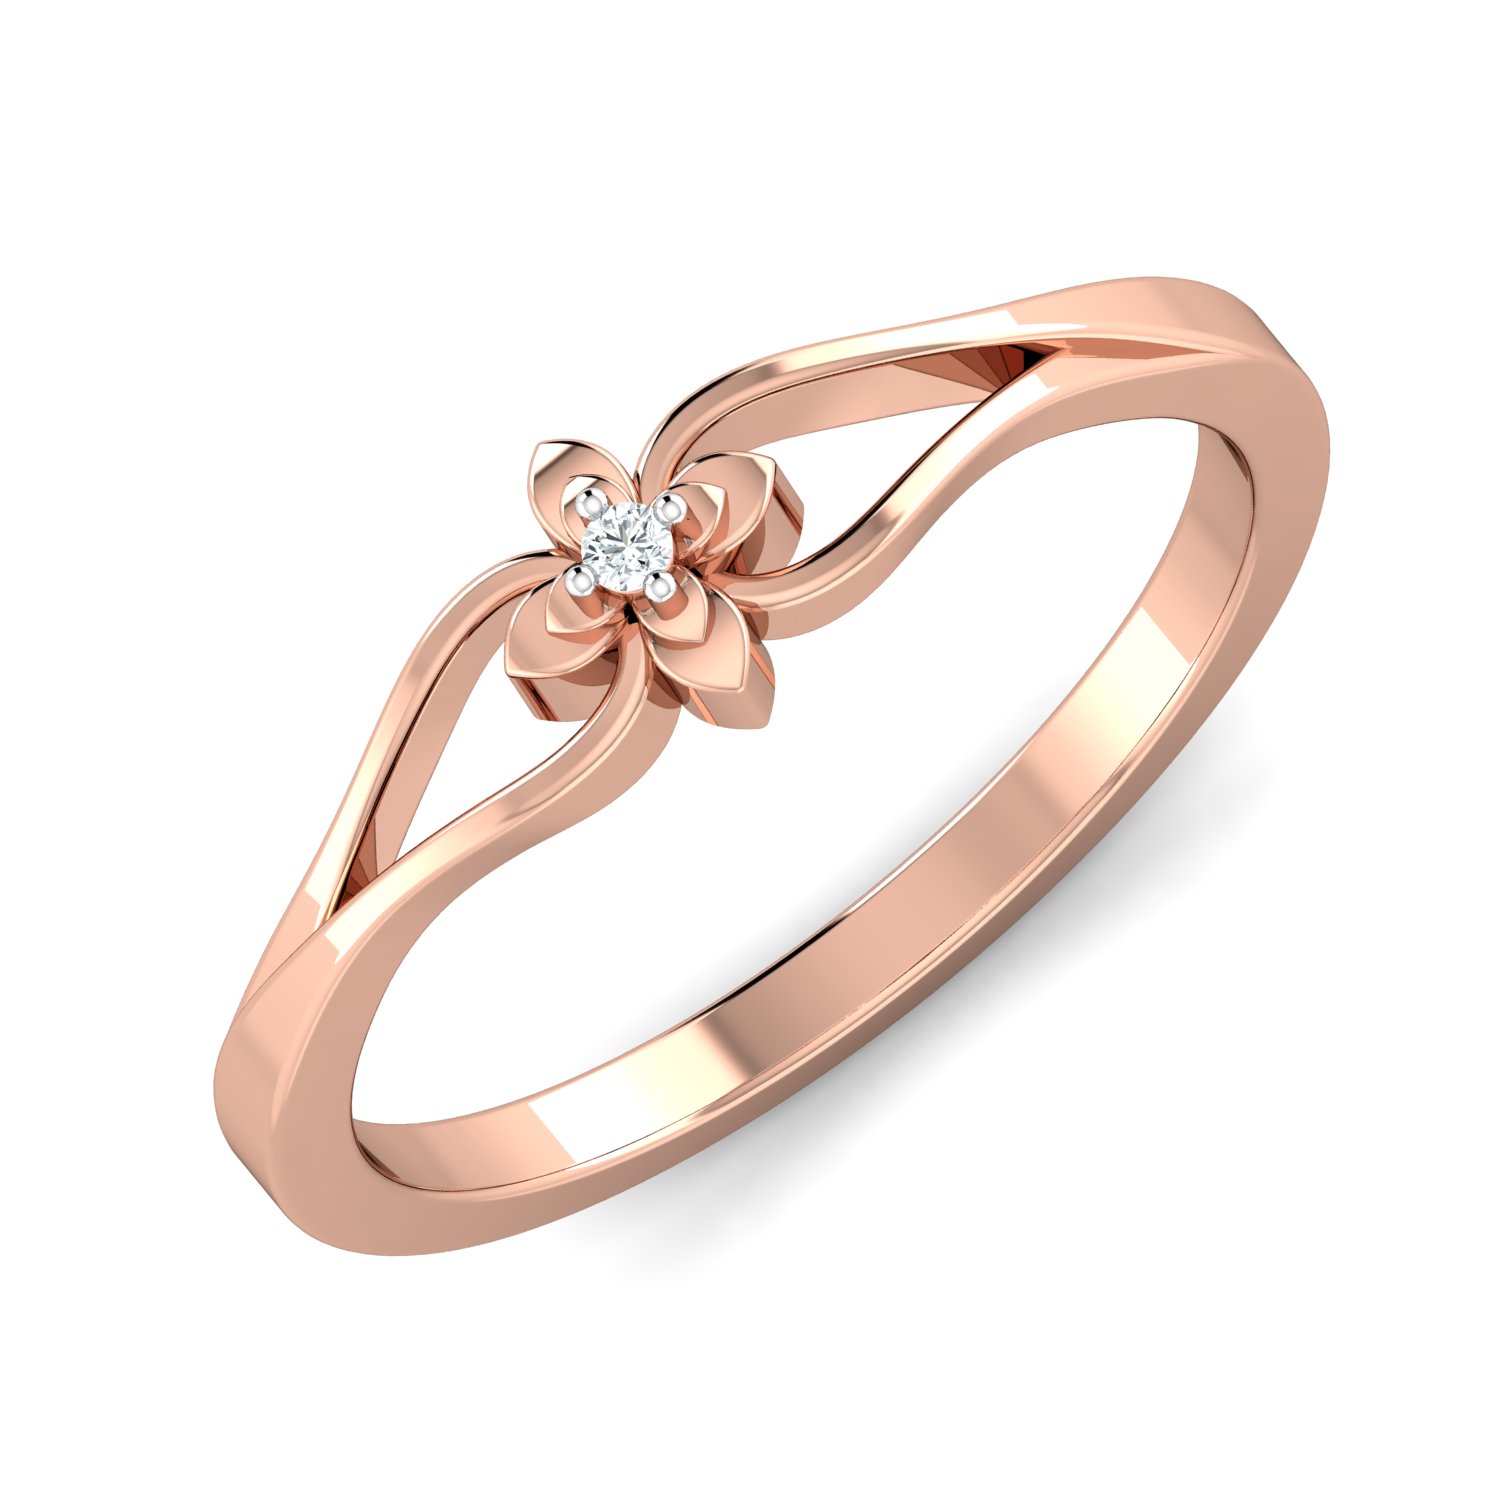 Engagement & Wedding Rings Under $15,000 | Victor Barbone Jewelry – Andria  Barboné Jewelry